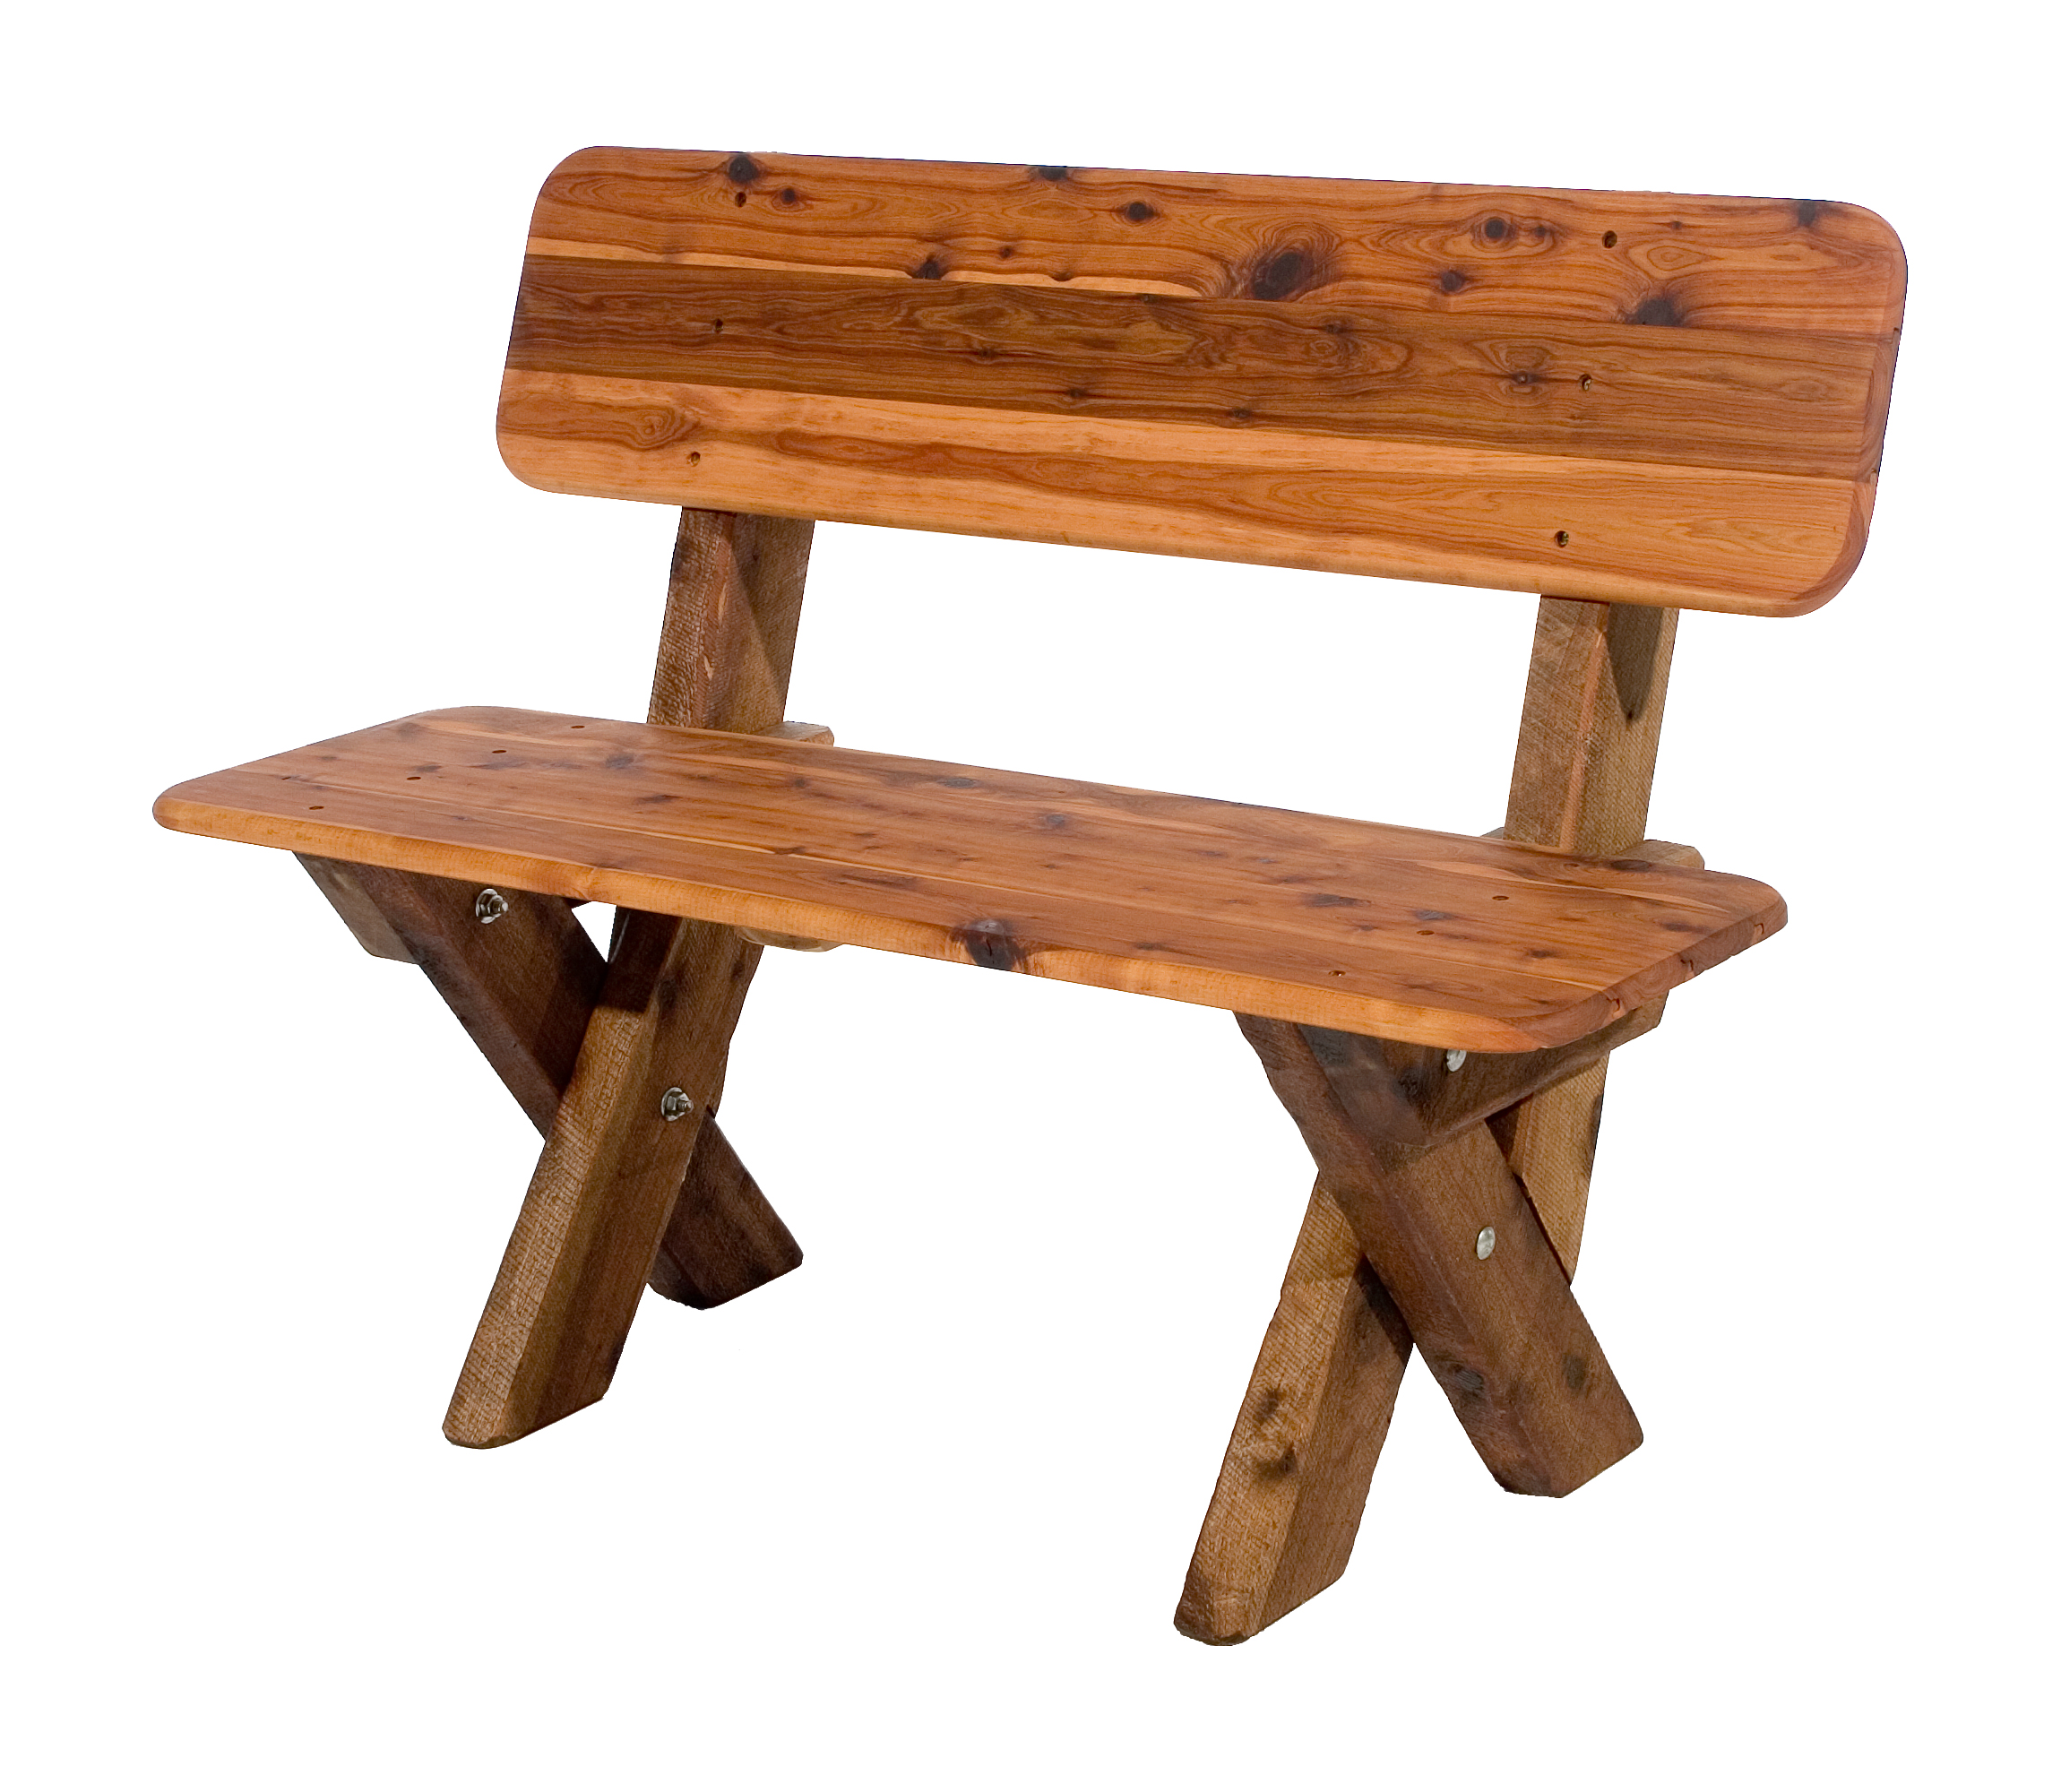 2 Seat High Back Cypress Outdoor Timber Bench available to order now